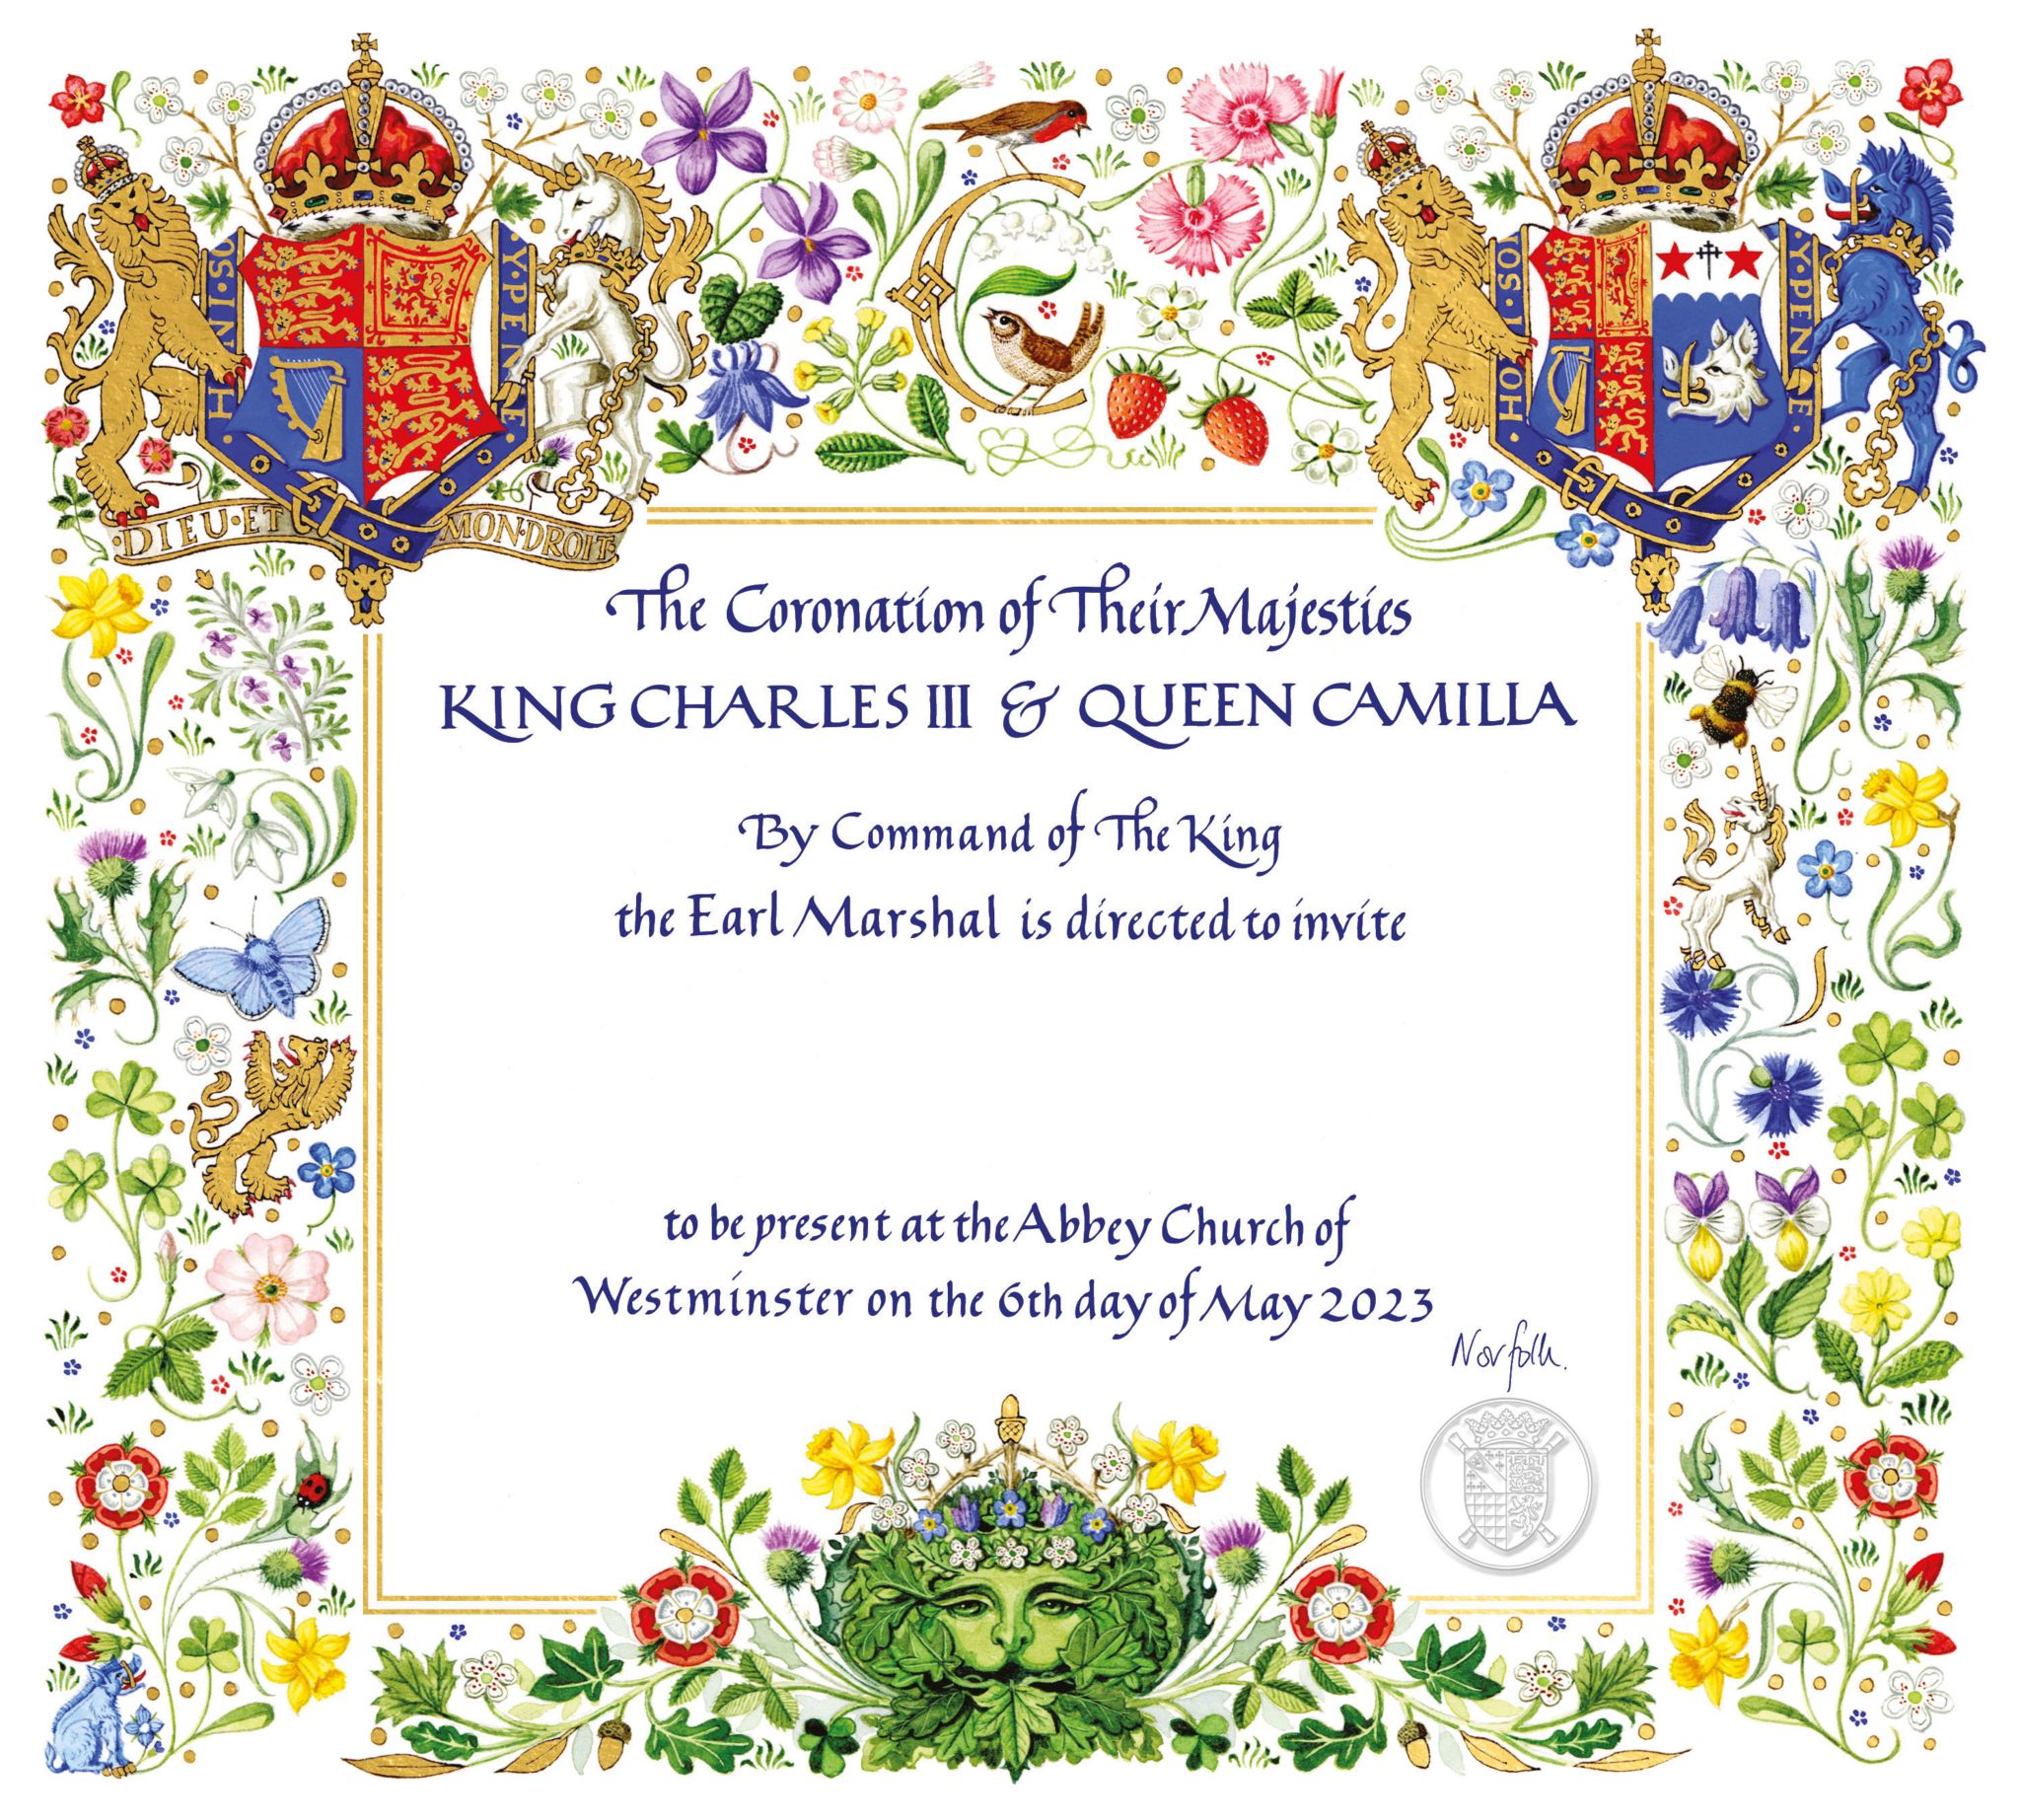 Coronation invitations issued by King Charles and 'Queen Camilla' BBC